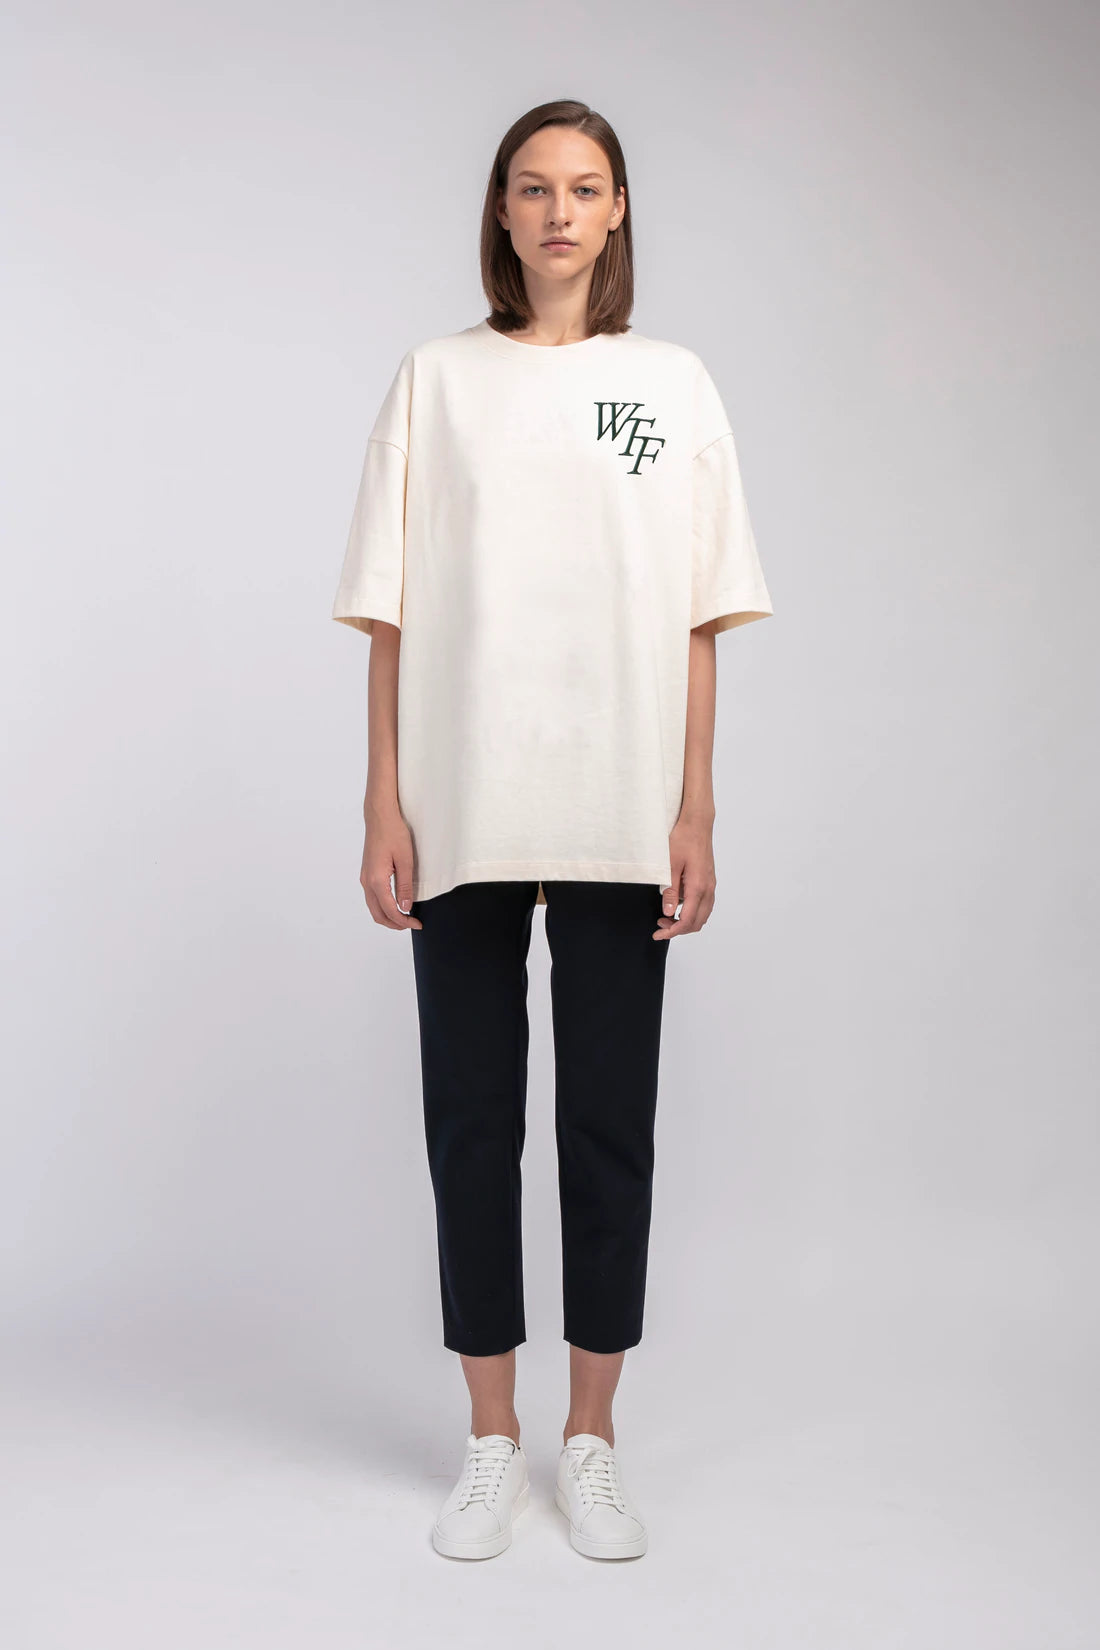 Matter Matters Wealth Technology Faculty / Long Tee（White）